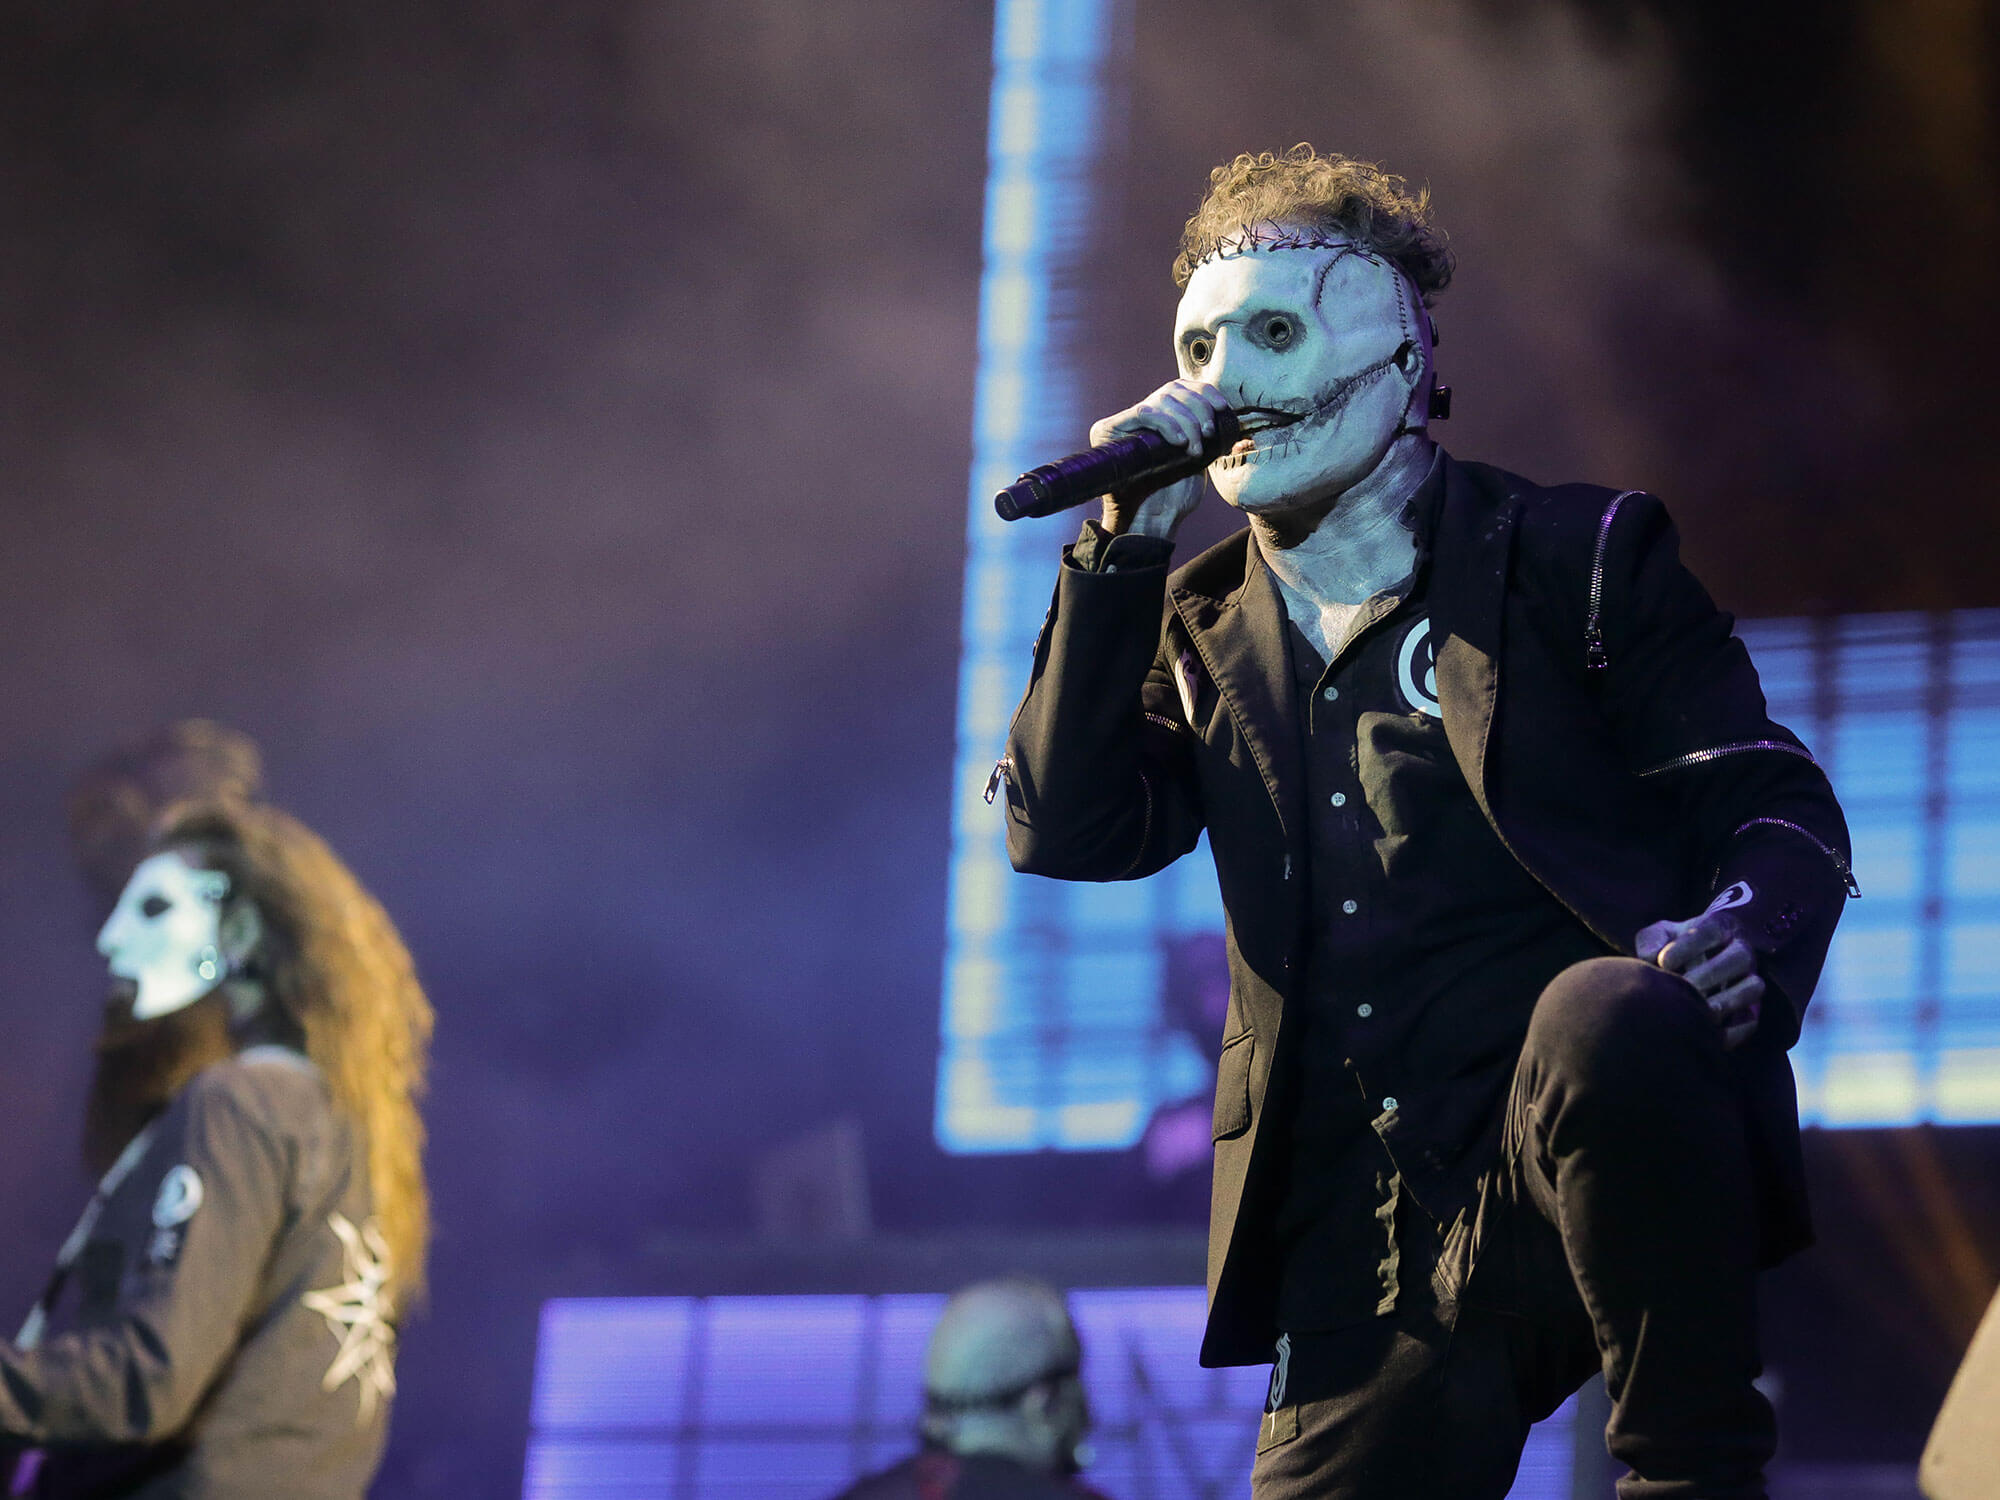 [L-R] Jim Root (in the background) and Corey Taylor of Slipknot performing live